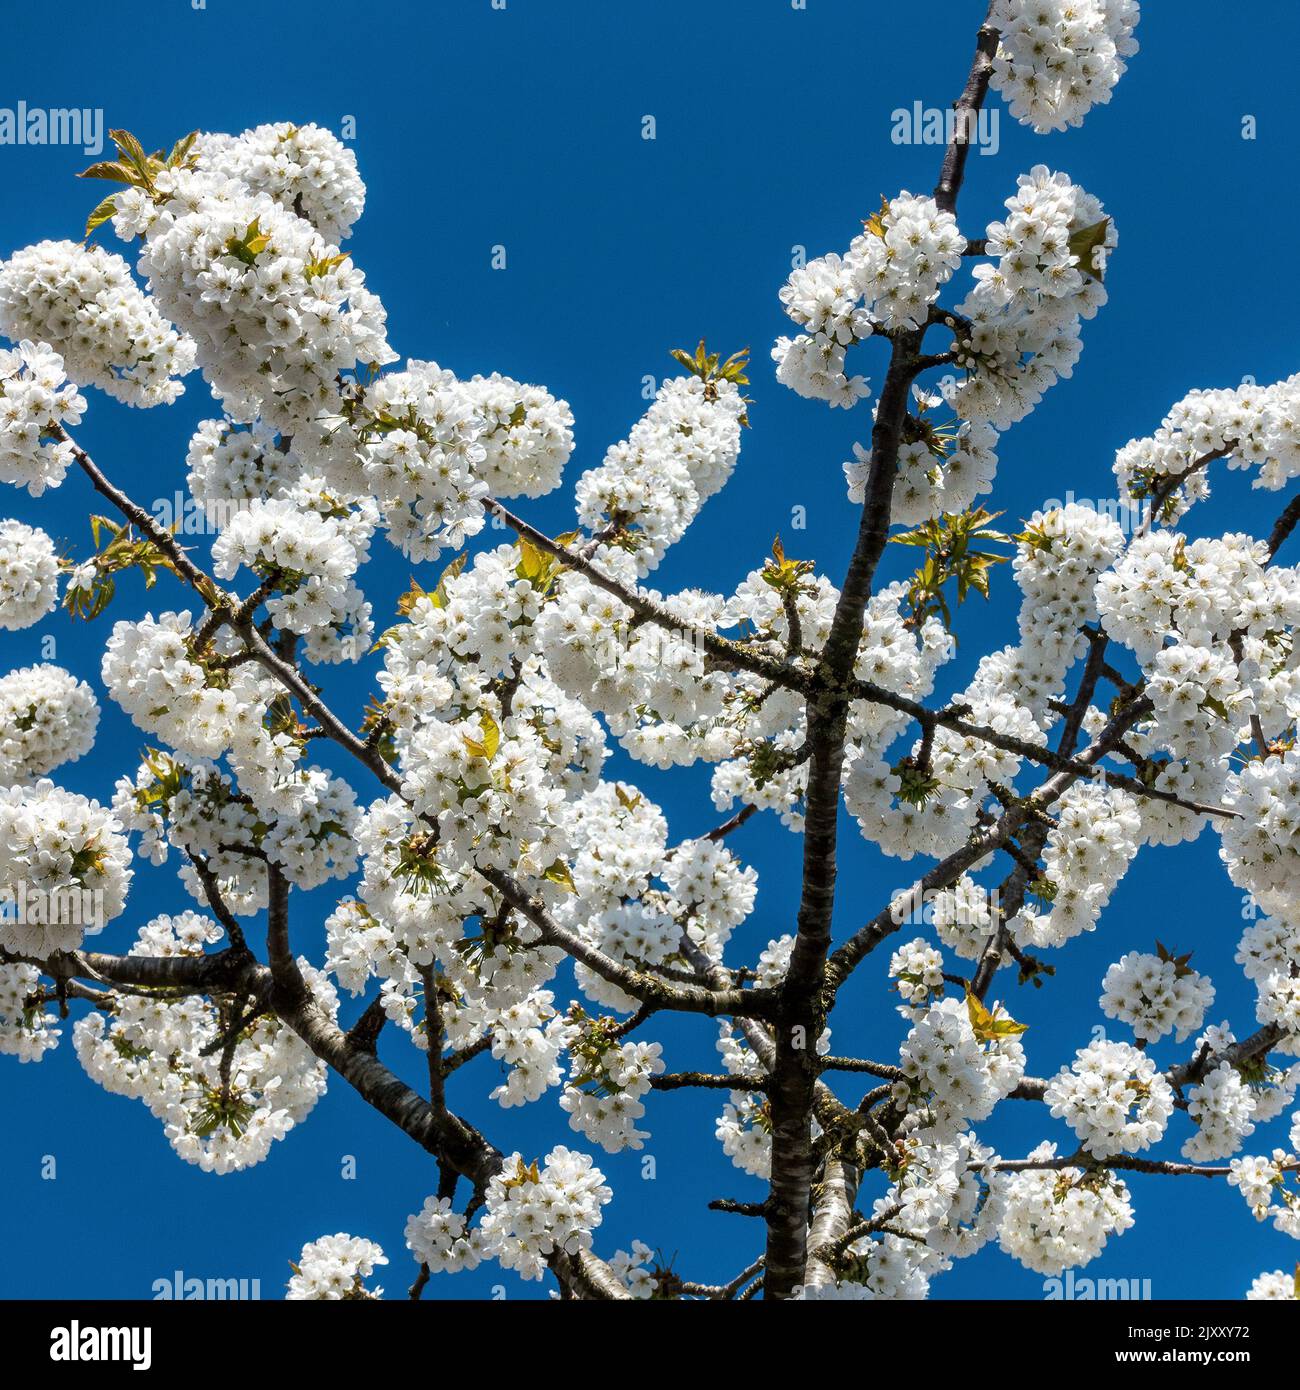 Closeup of white cherry blossom flowers against blue sky in UK in Spring Stock Photo